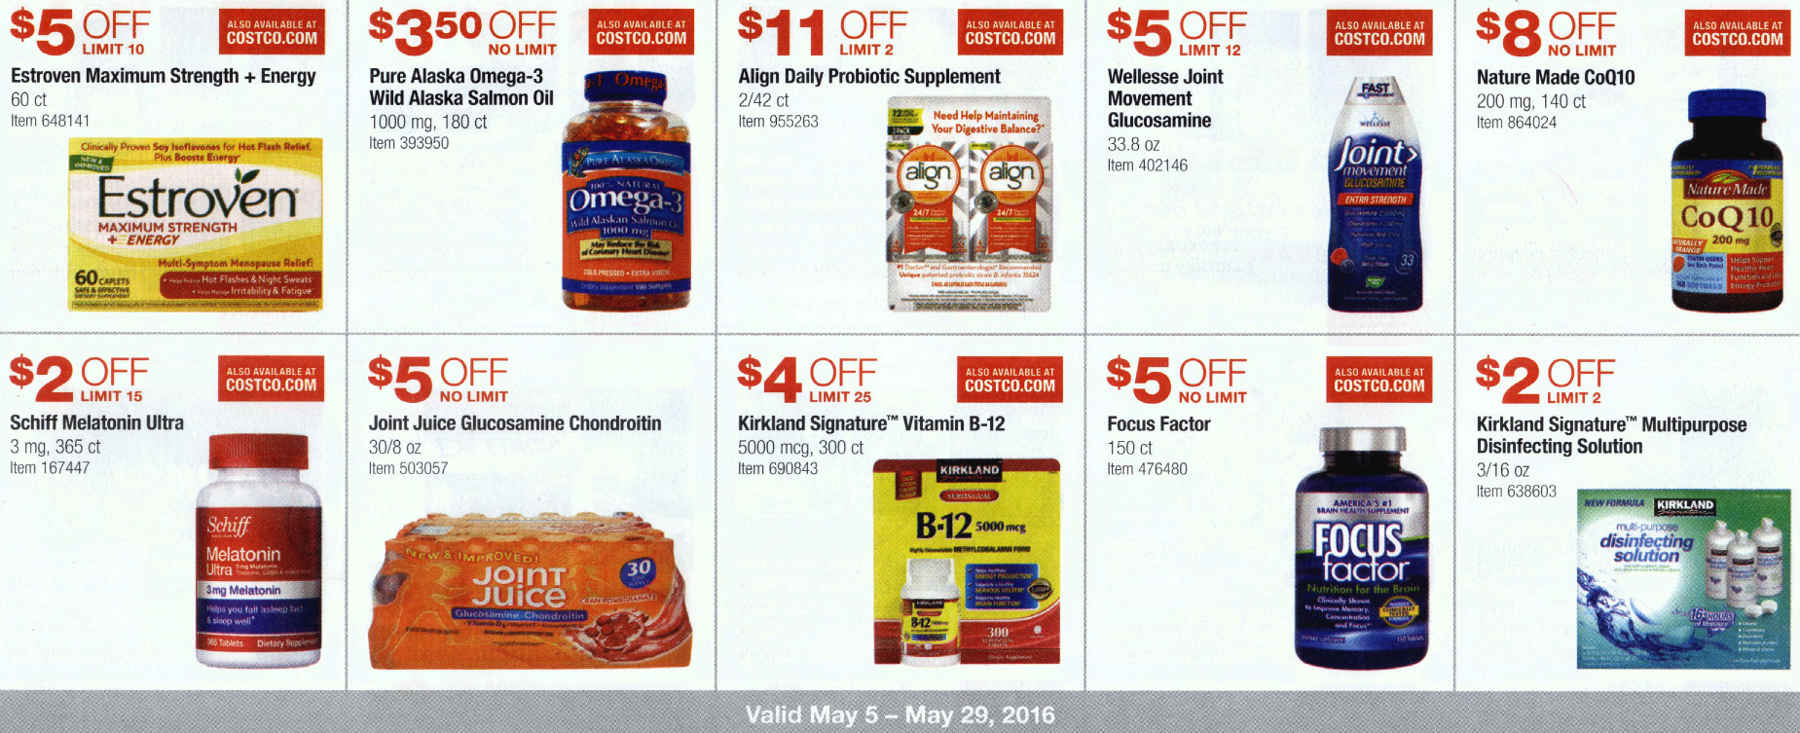 Coupon book full size page -> 13 <-